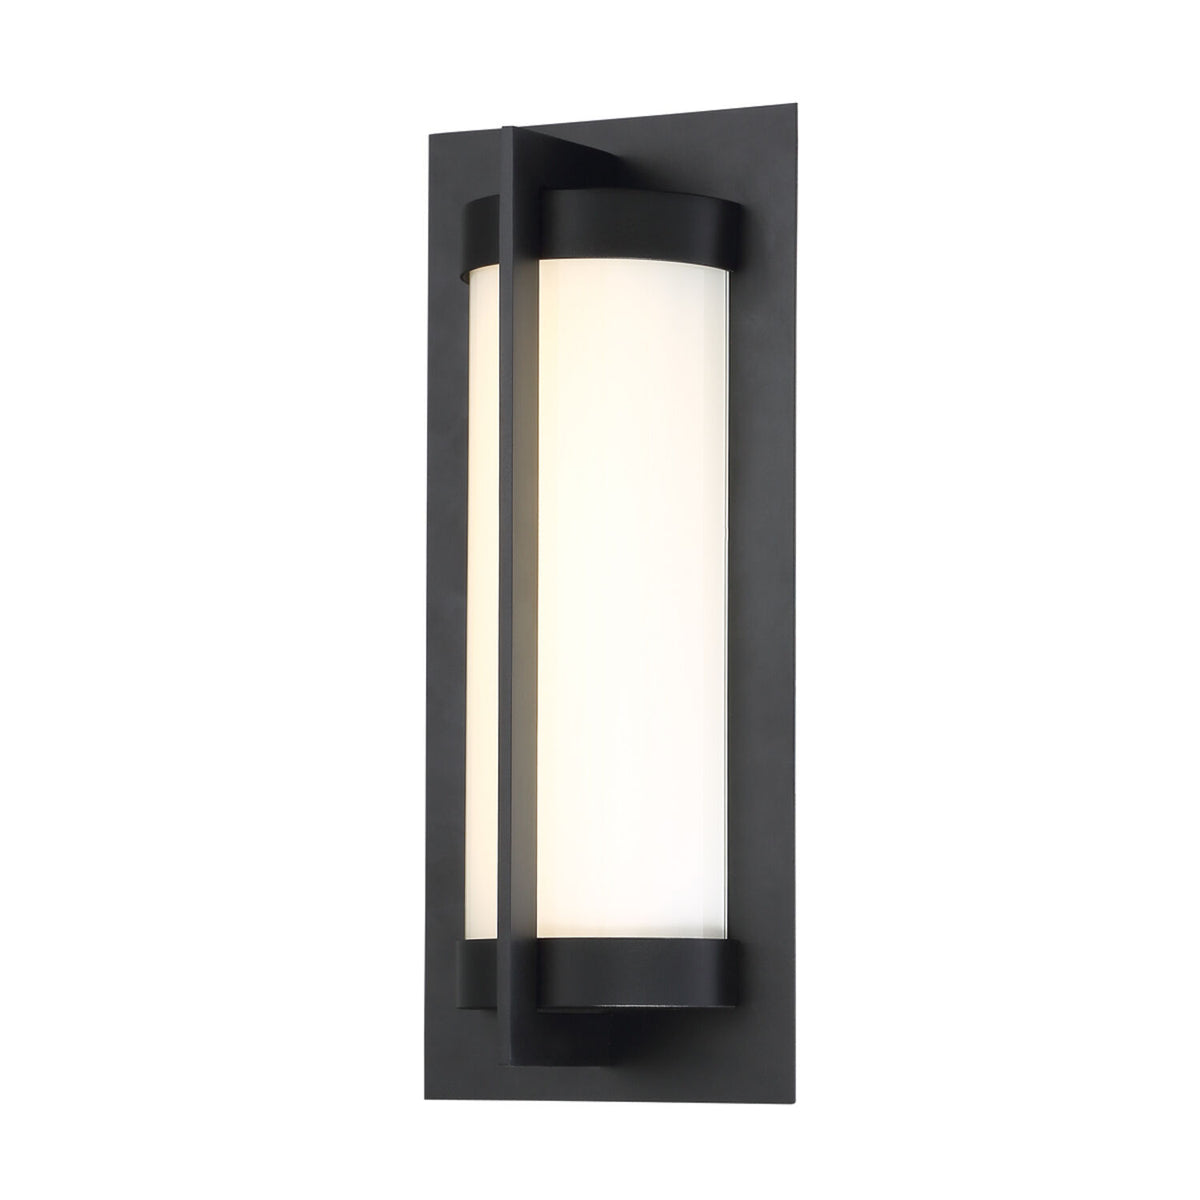 OBERON 14-INCH 3000K LED INDOOR AND OUTDOOR WALL LIGHT